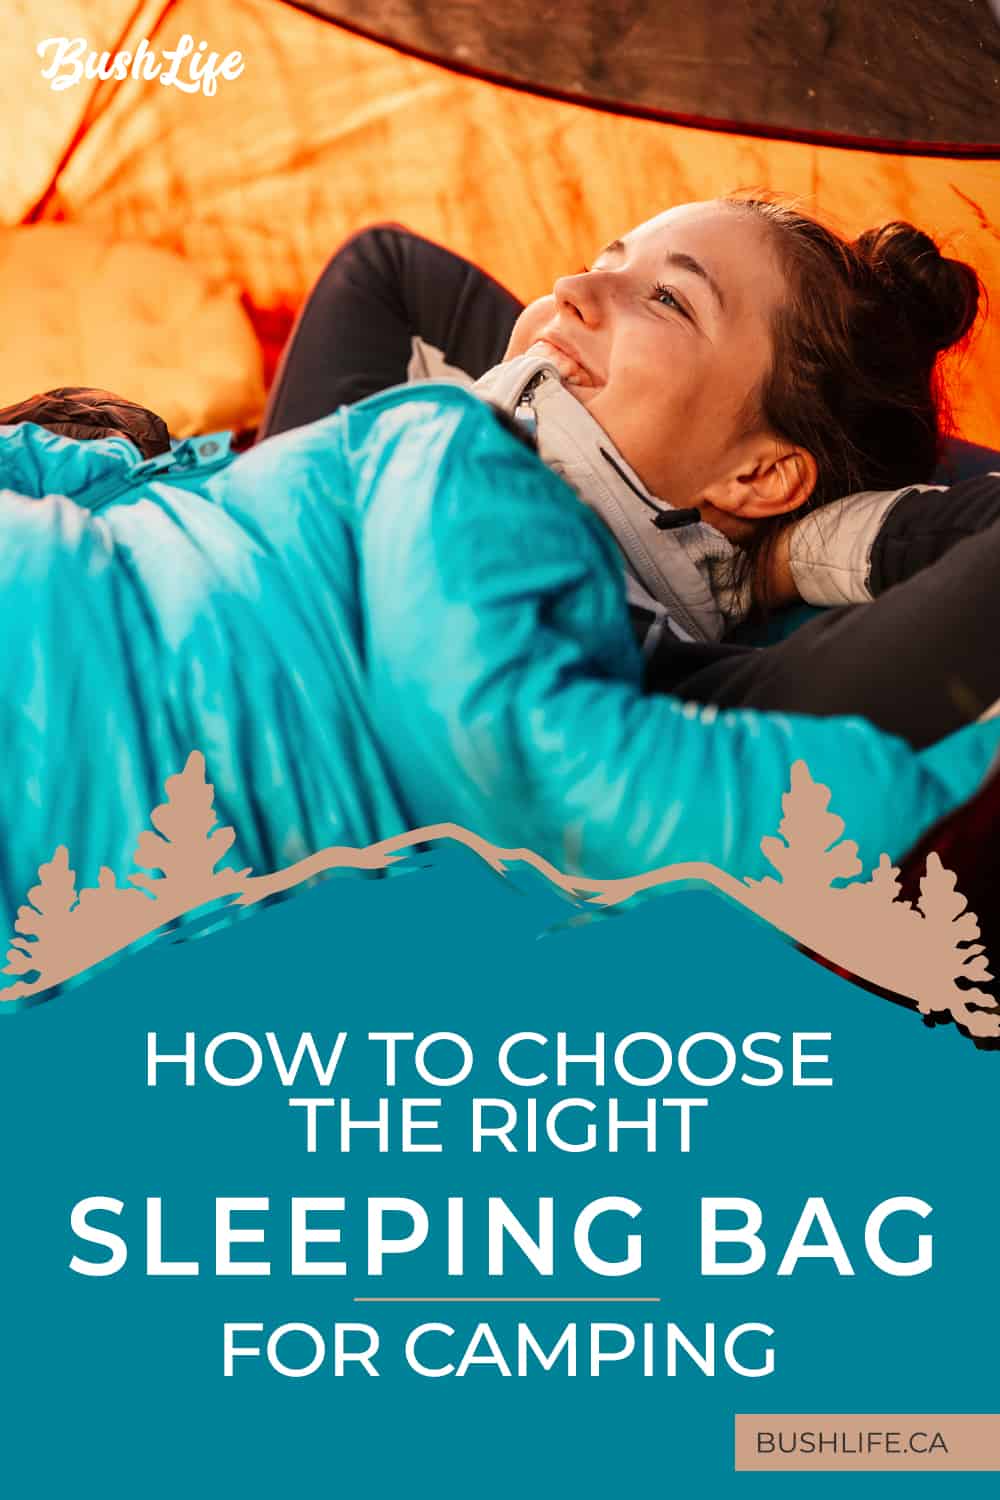 How To Choose the Right Sleeping Bag for Camping